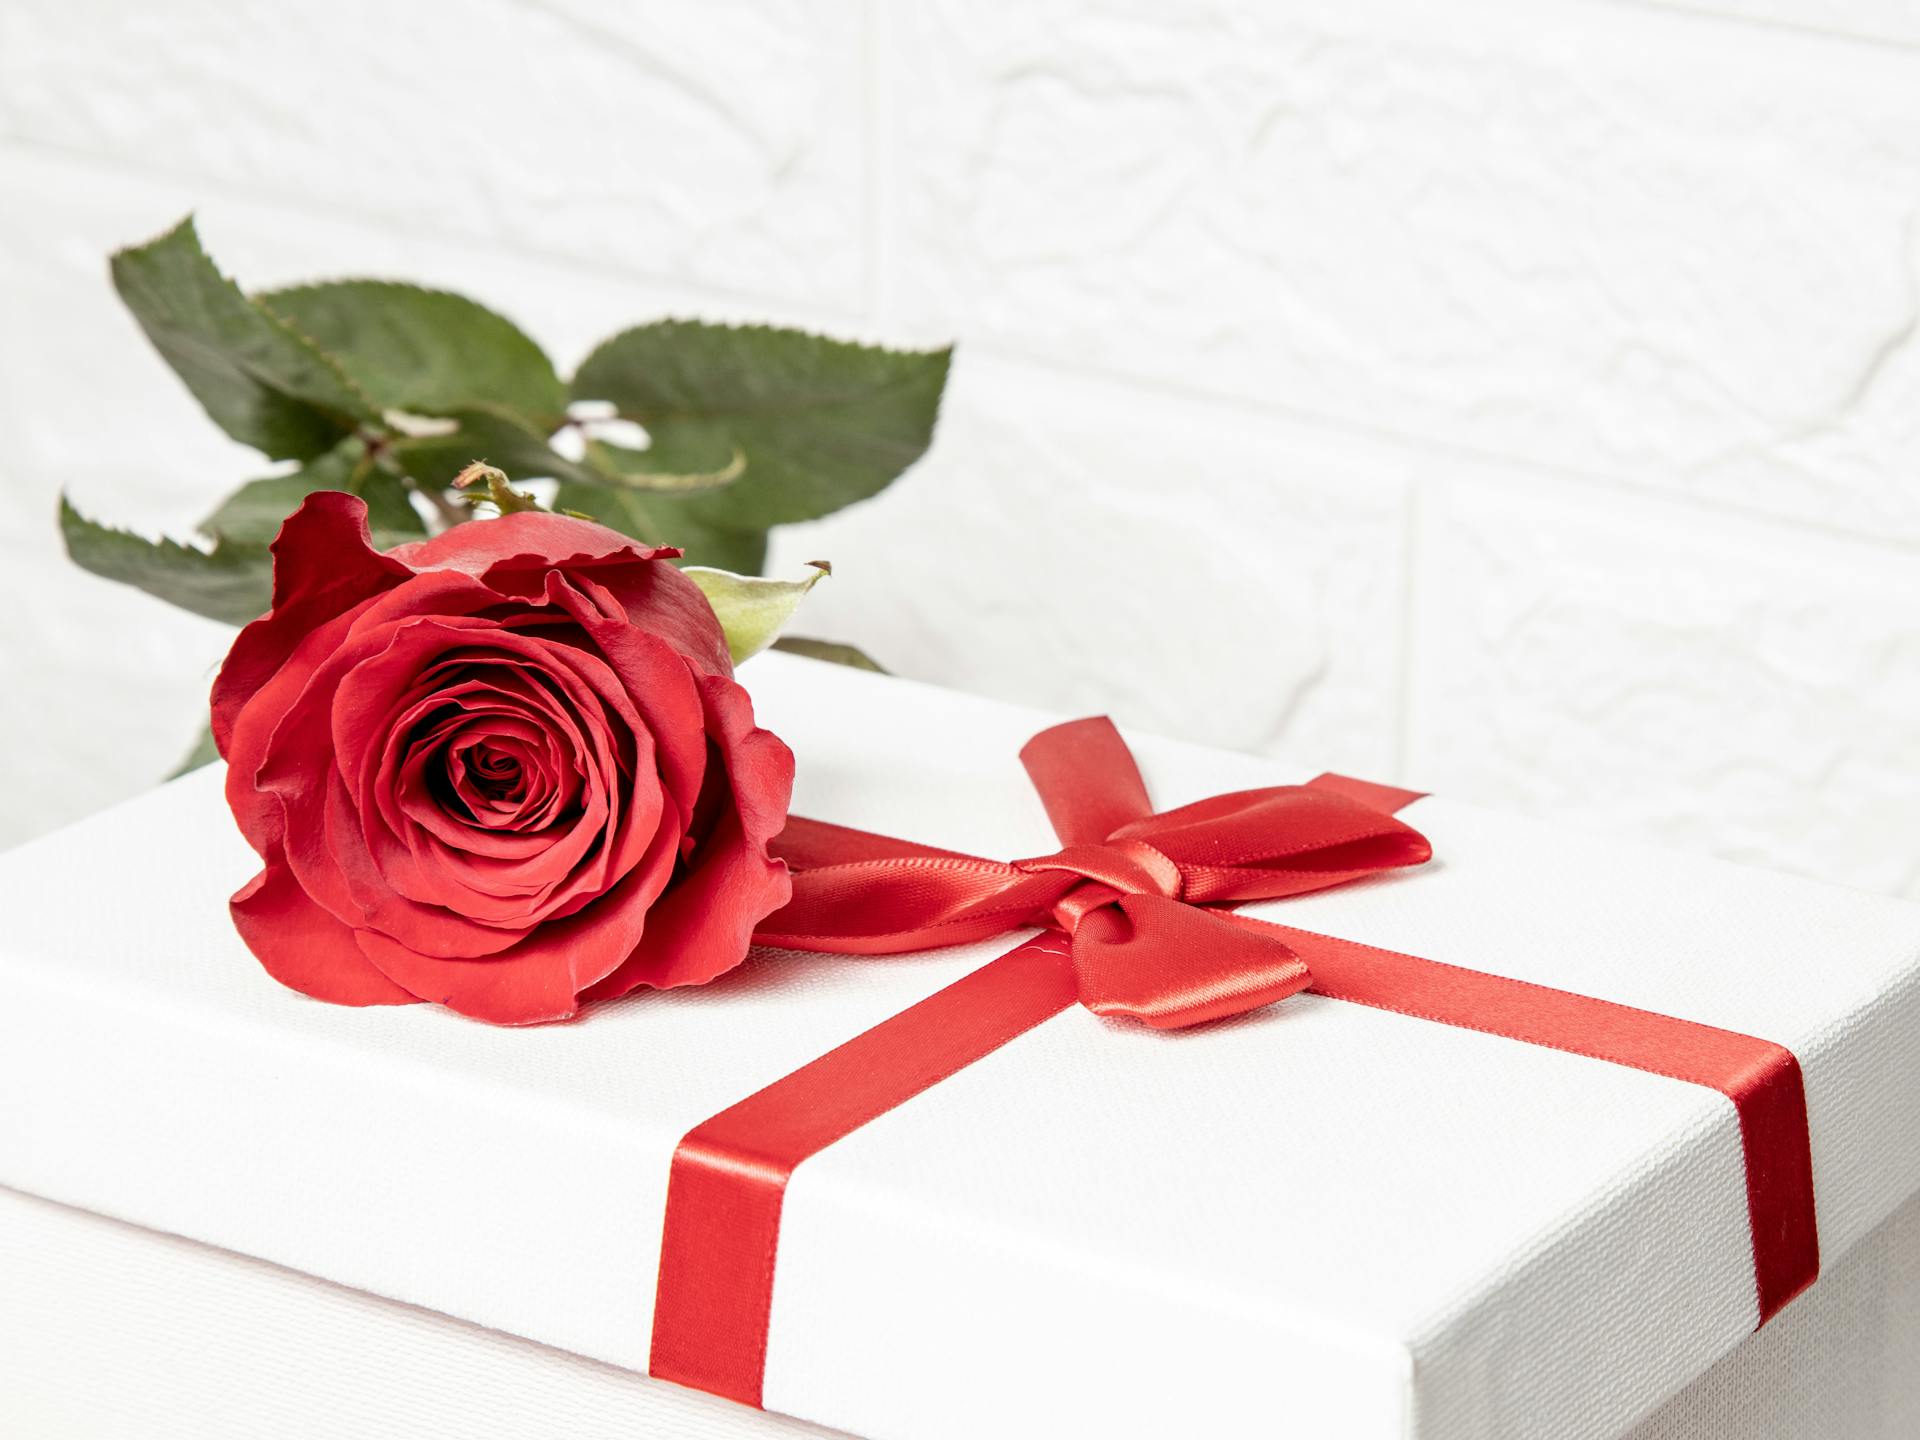 A red rose lying on a white gift box tied with a red ribbon | Source: Pexels